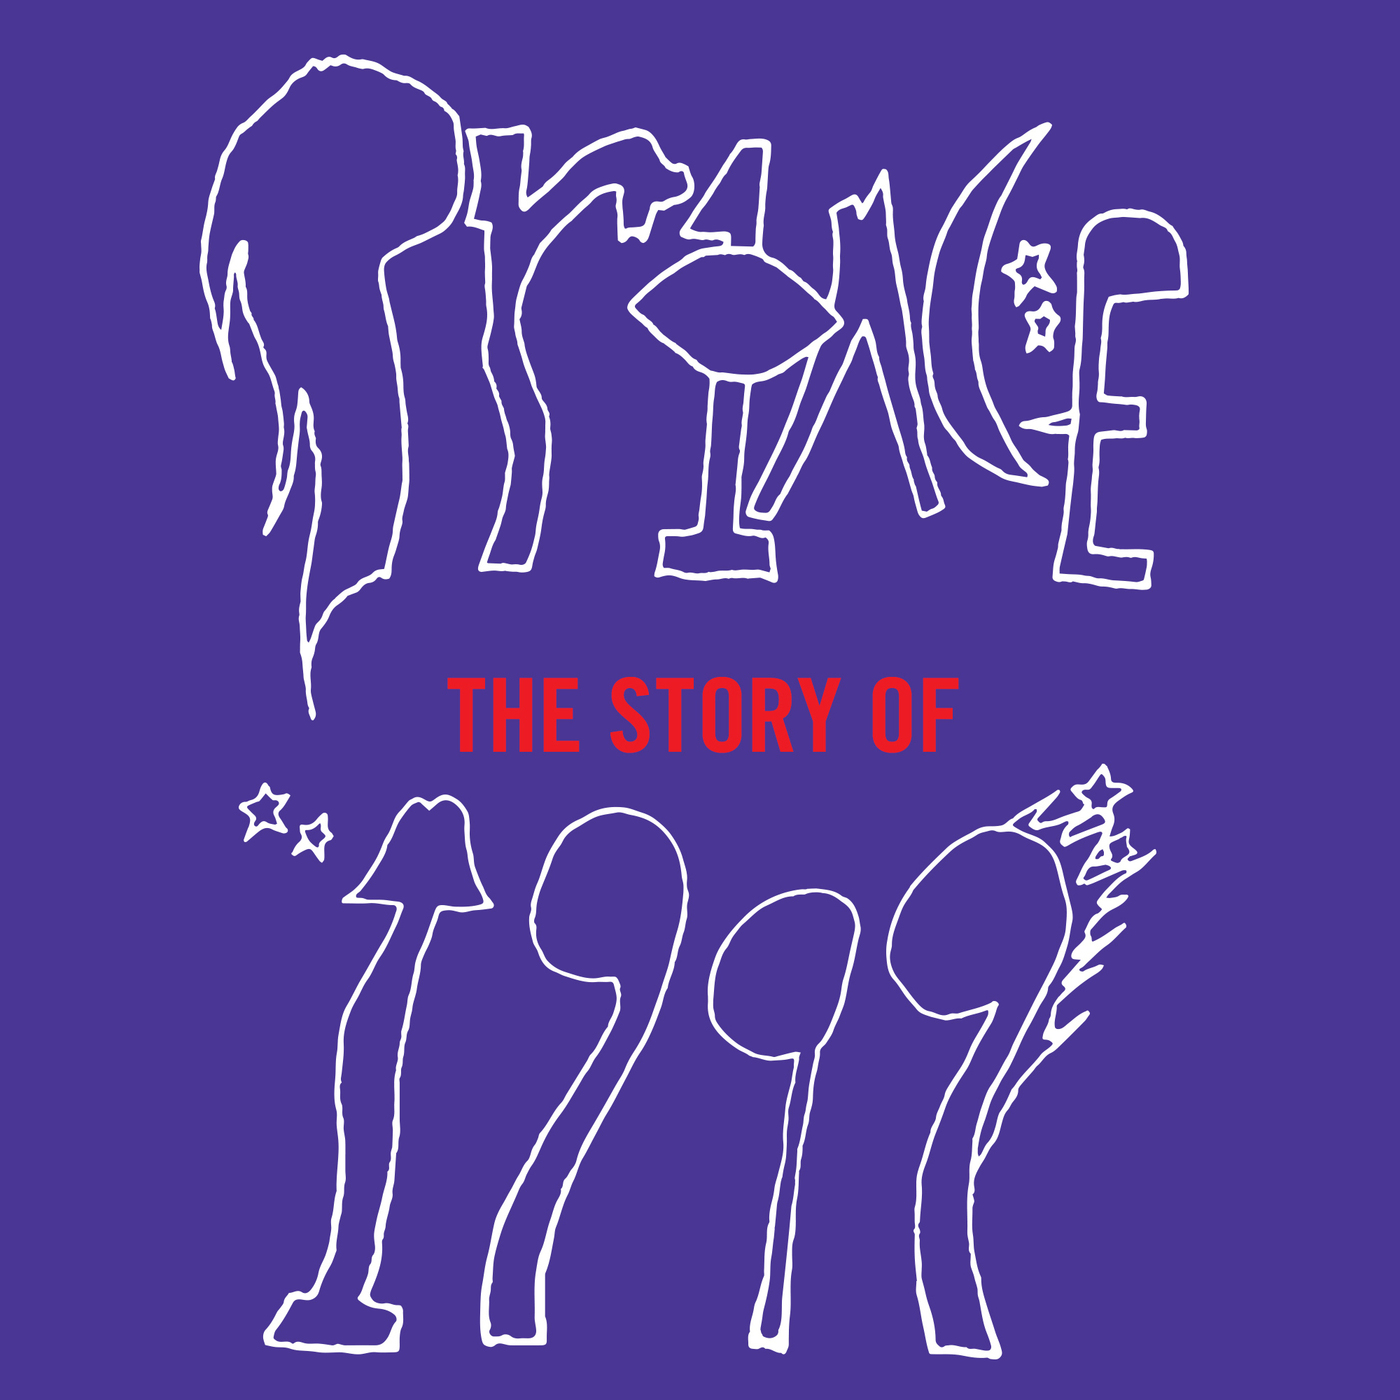 Prince: The Story of 1999, Episode 1: My Mind Says Prepare to Fight